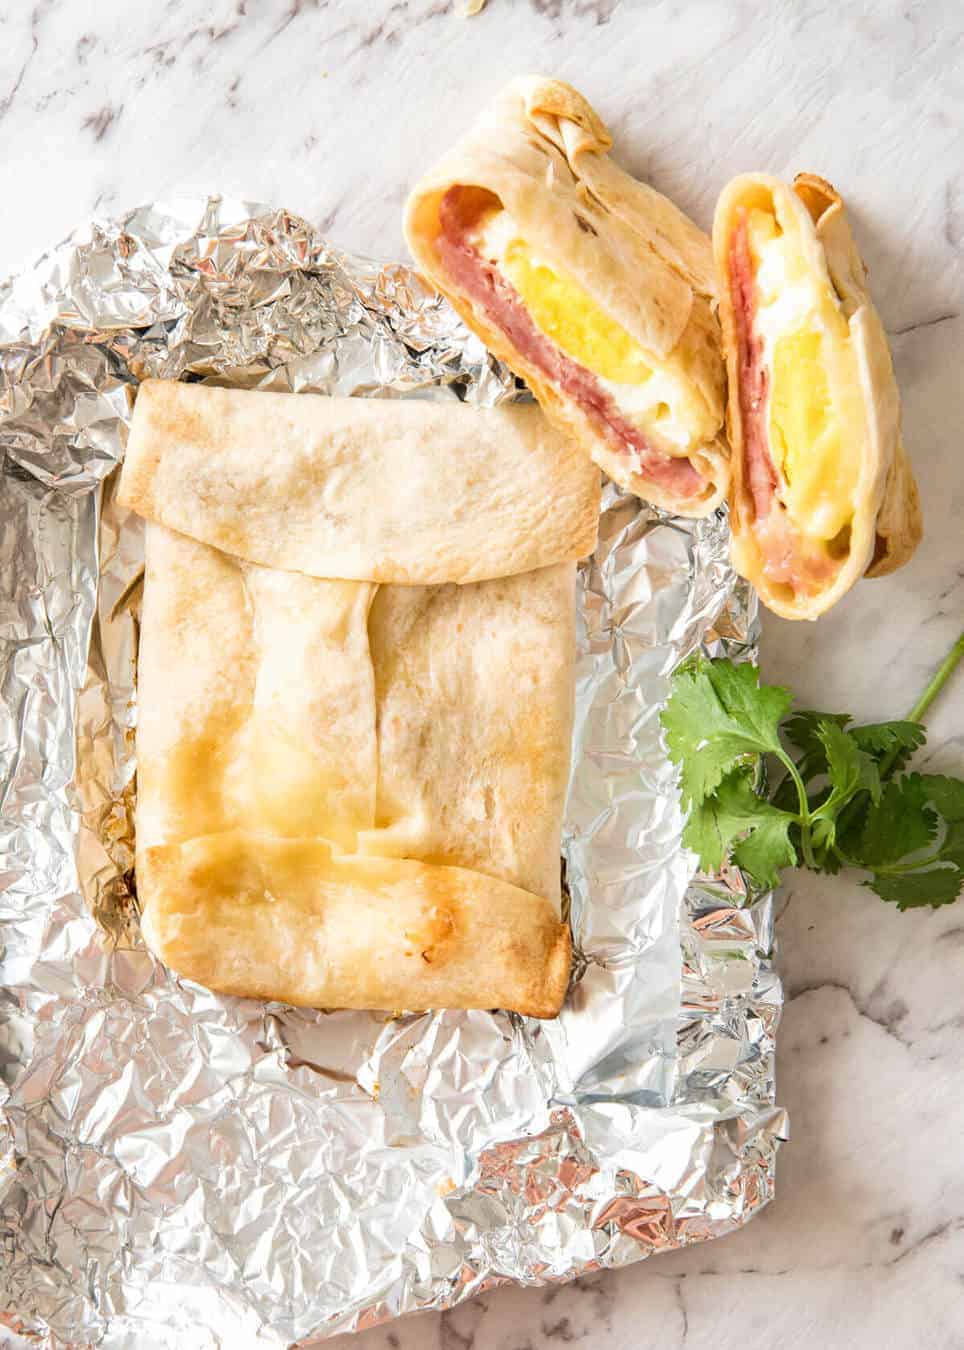 Hot ham, egg and cheese pockets made with tortillas wrapped in foil for baking.